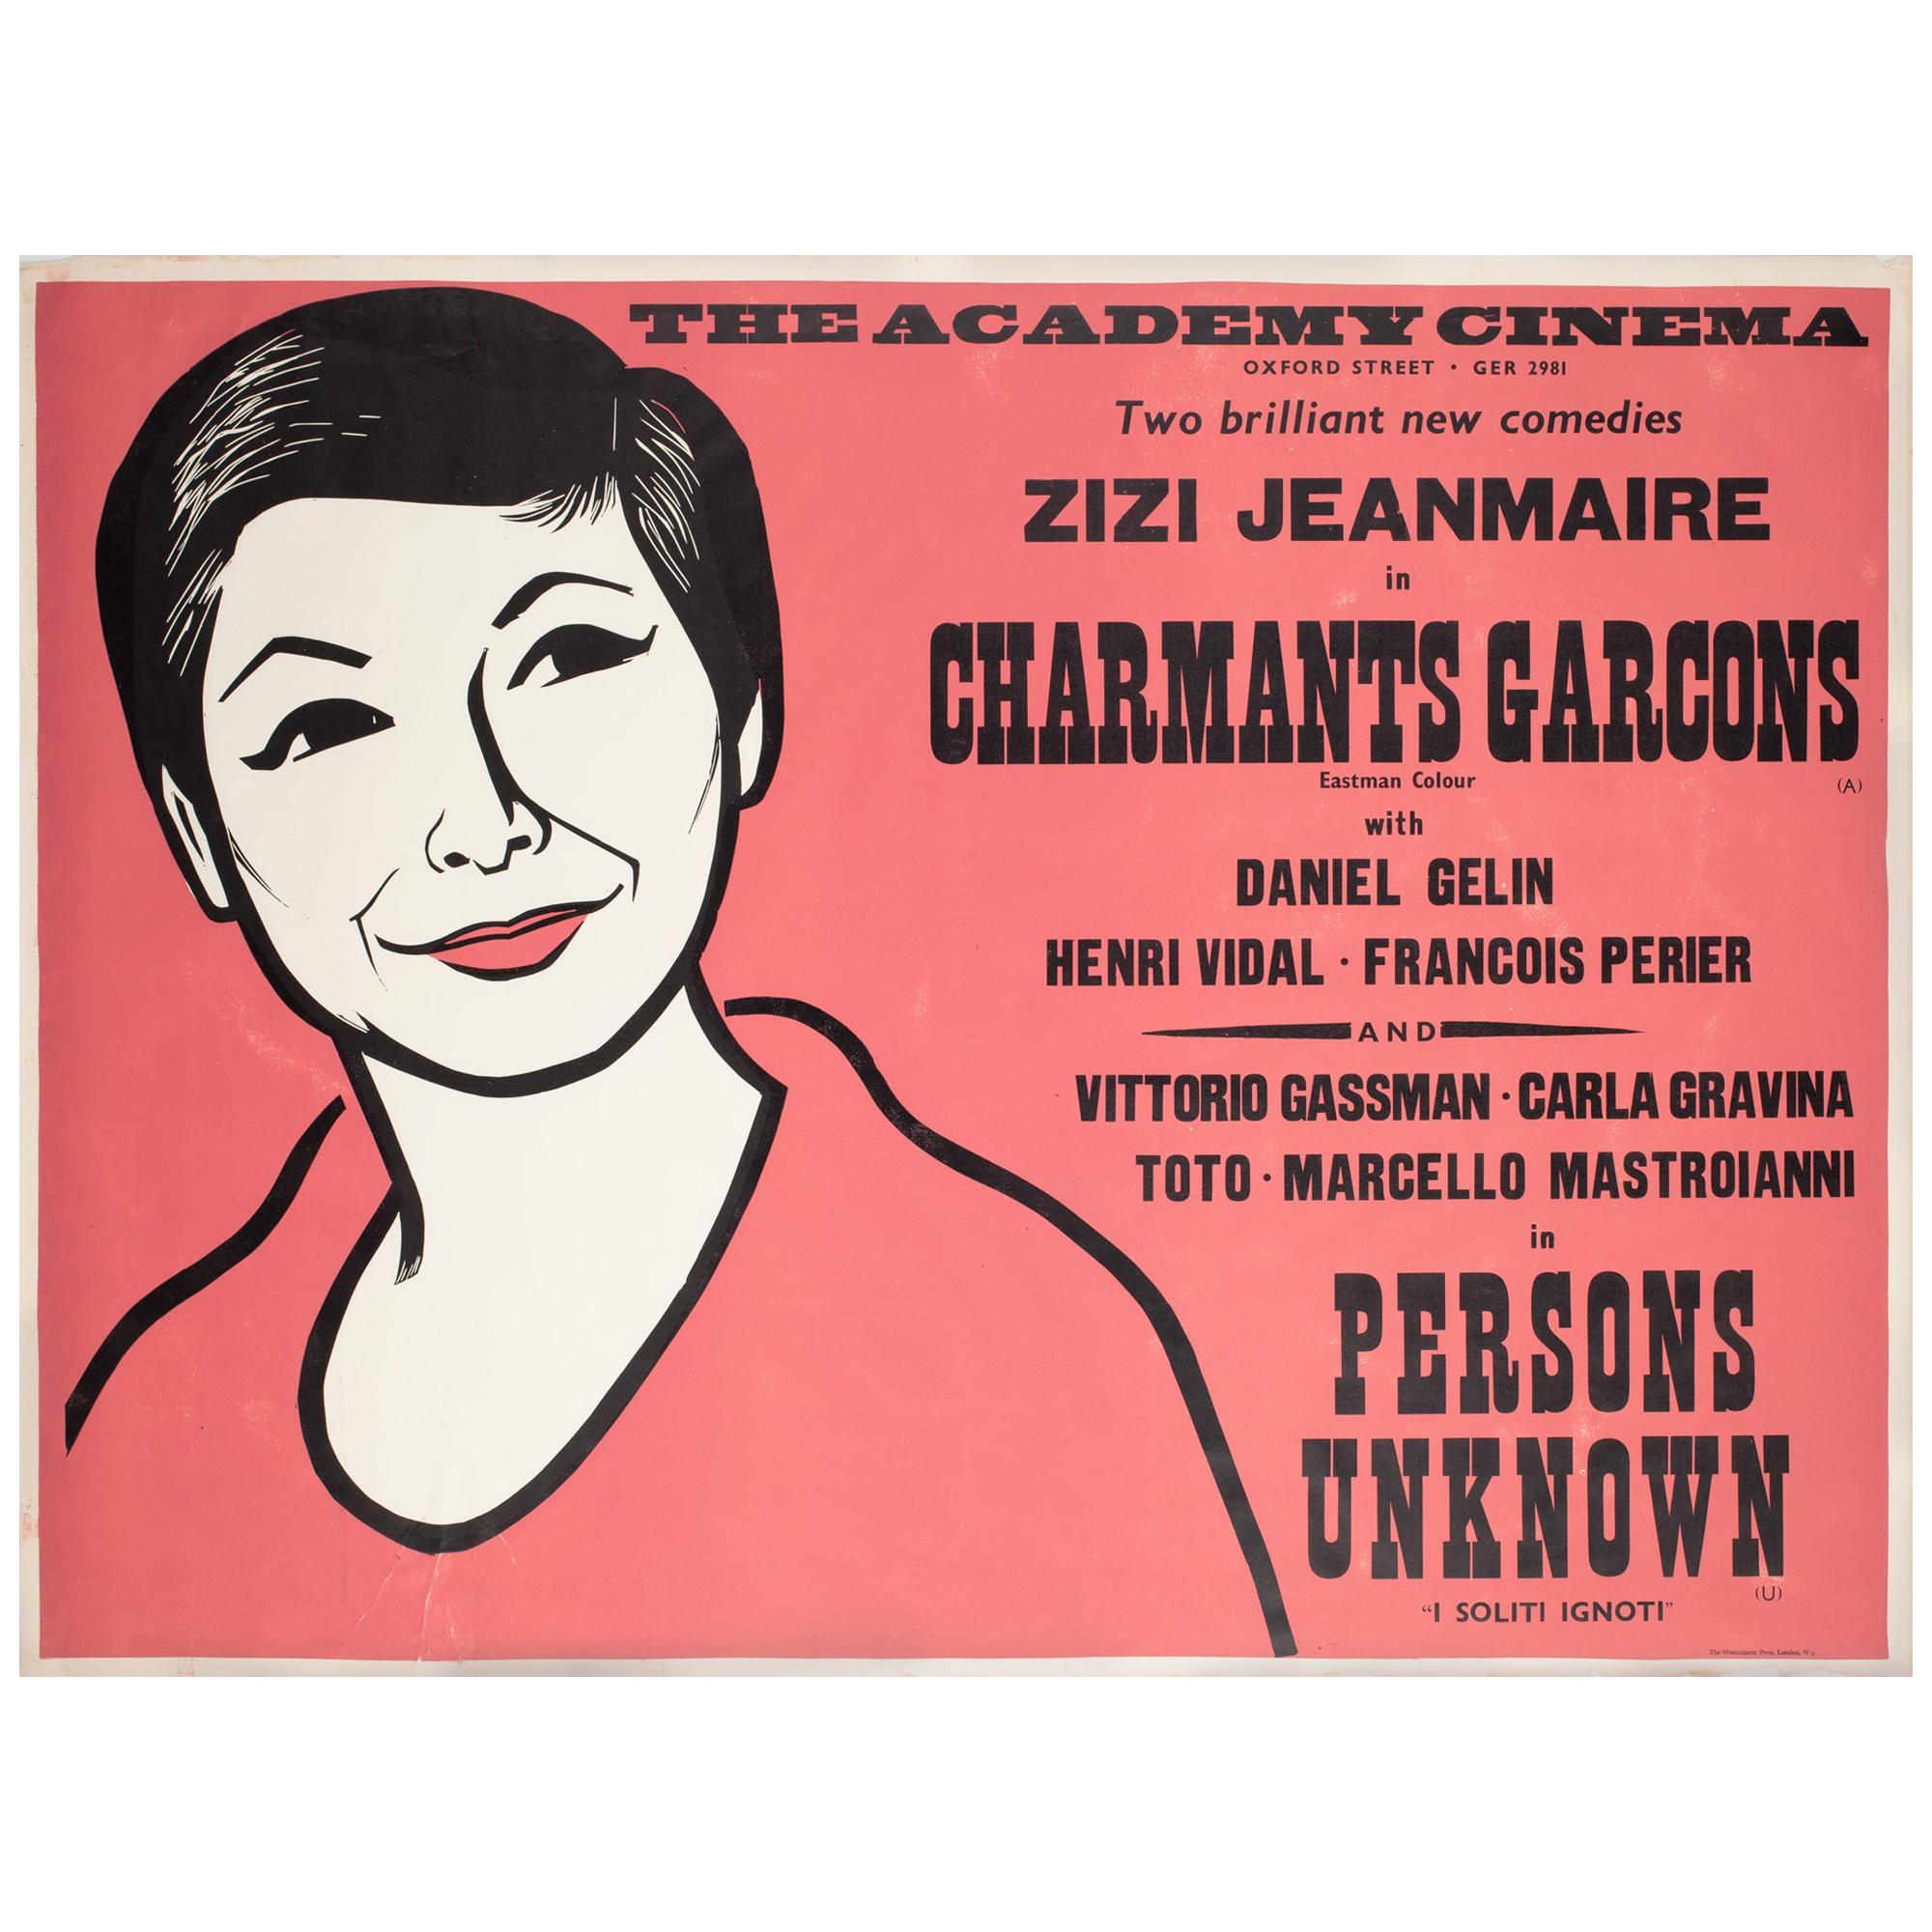 Charmants Garcons/Persons Unknown 1959 Academy Cinema Film Poster, Strausfeld